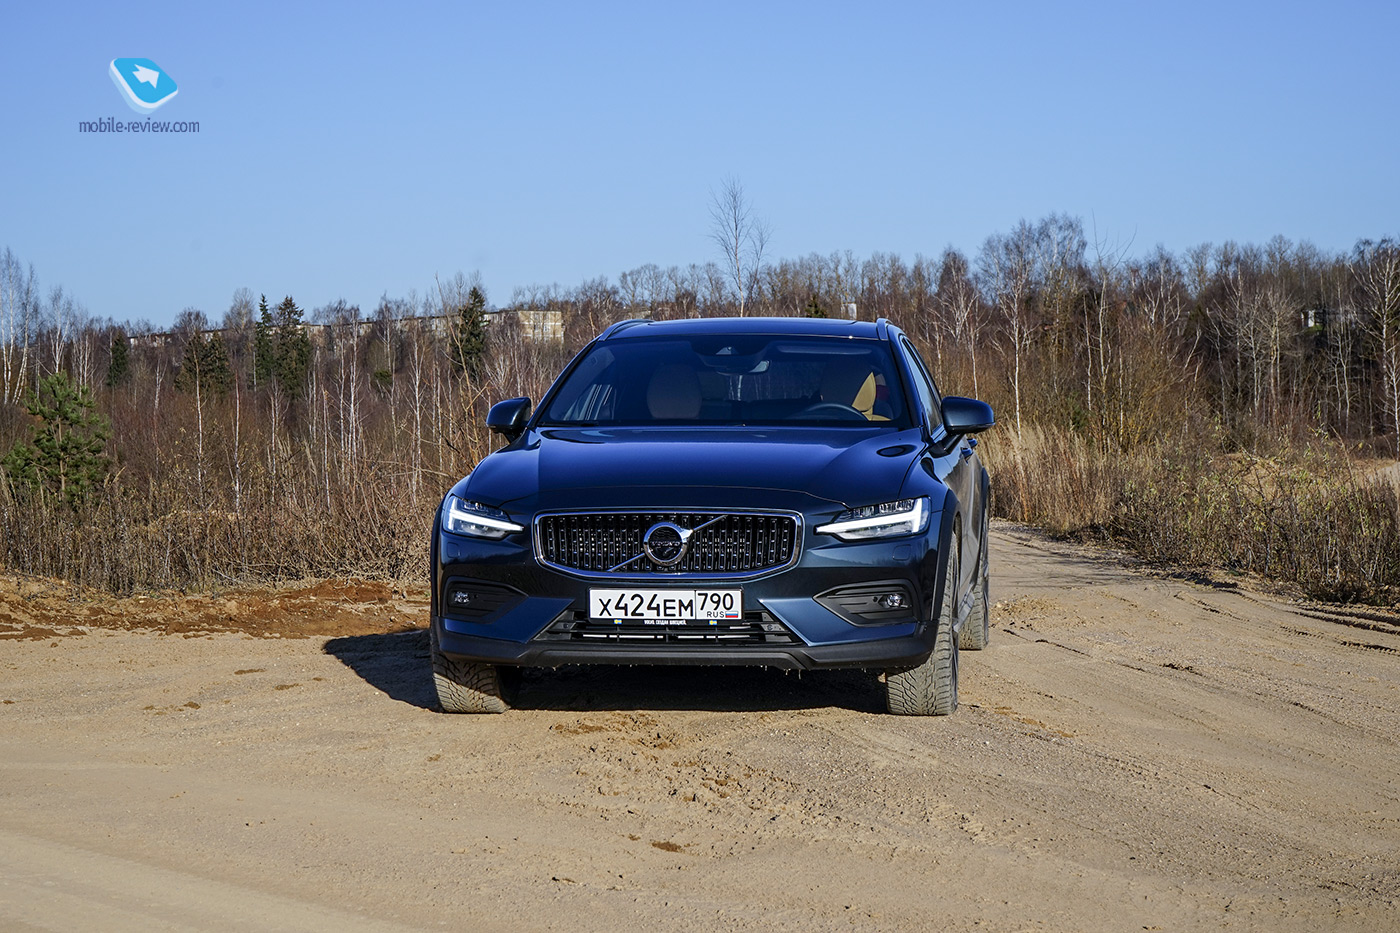 Volvo V60 Cross Country test. Practical station wagon